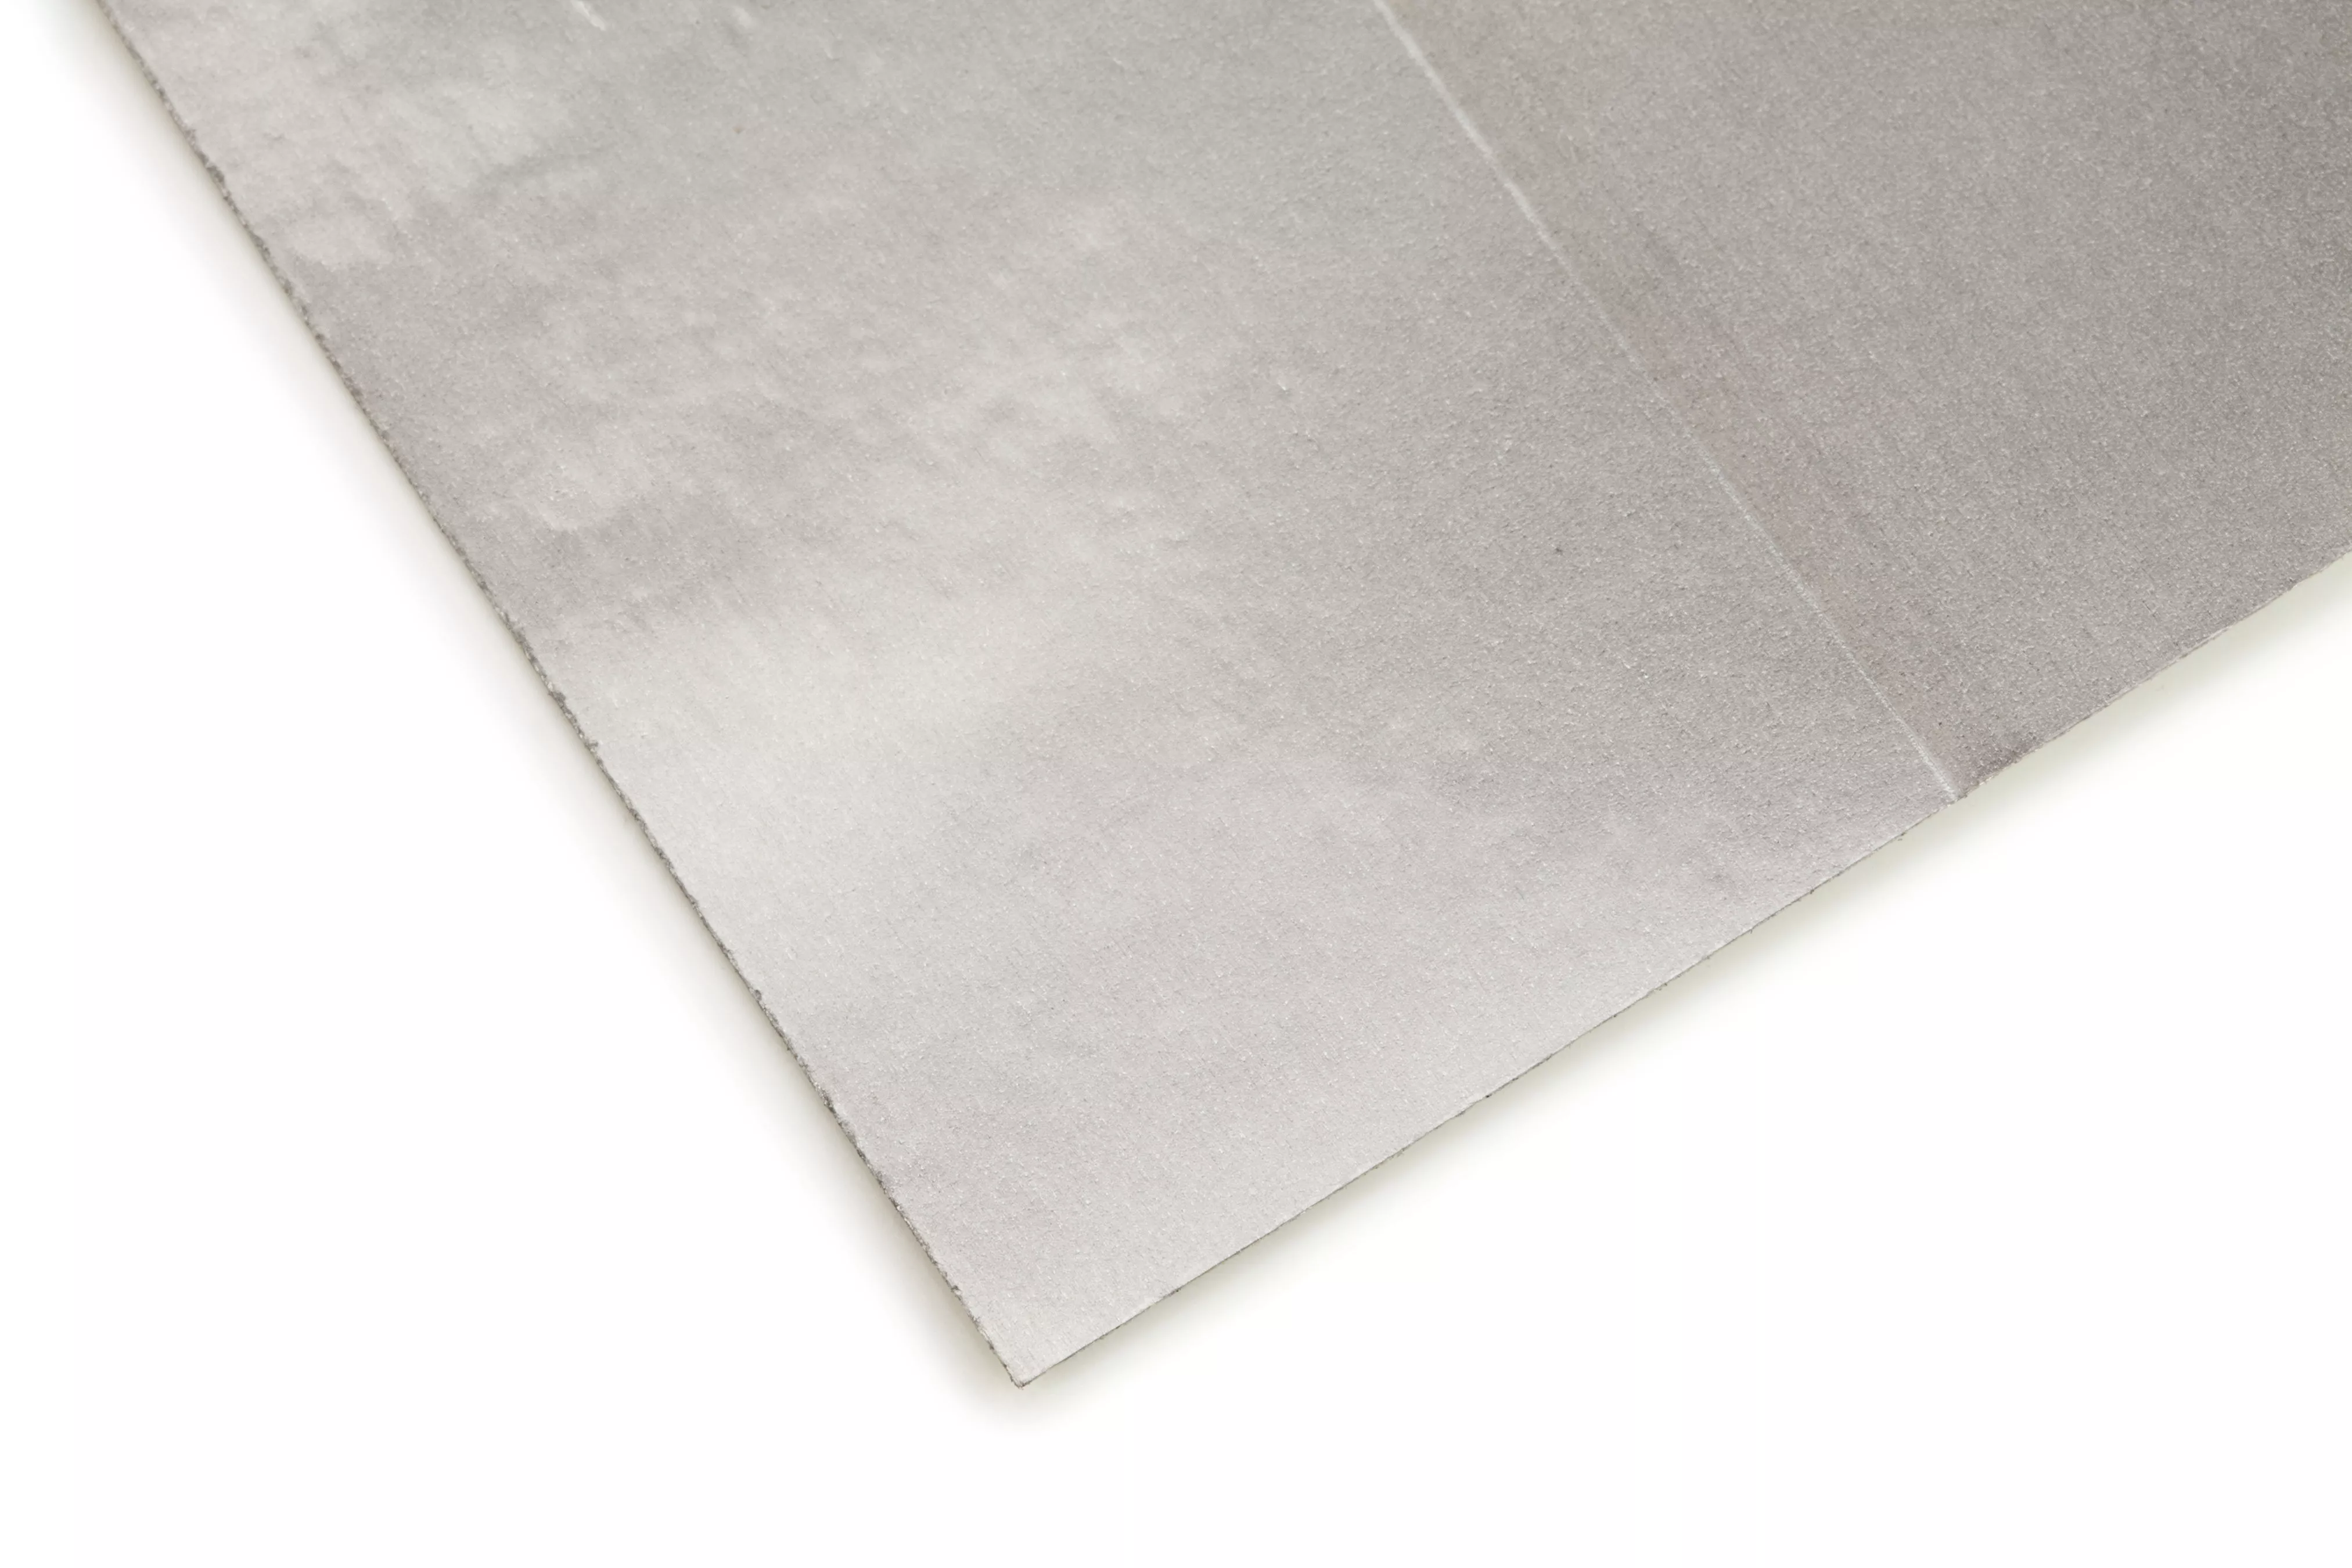 3M™ Magnetic Shielding with Thermosetting Rubber Adhesive Sheet 1380,
460MM X 610MM, 1/Case